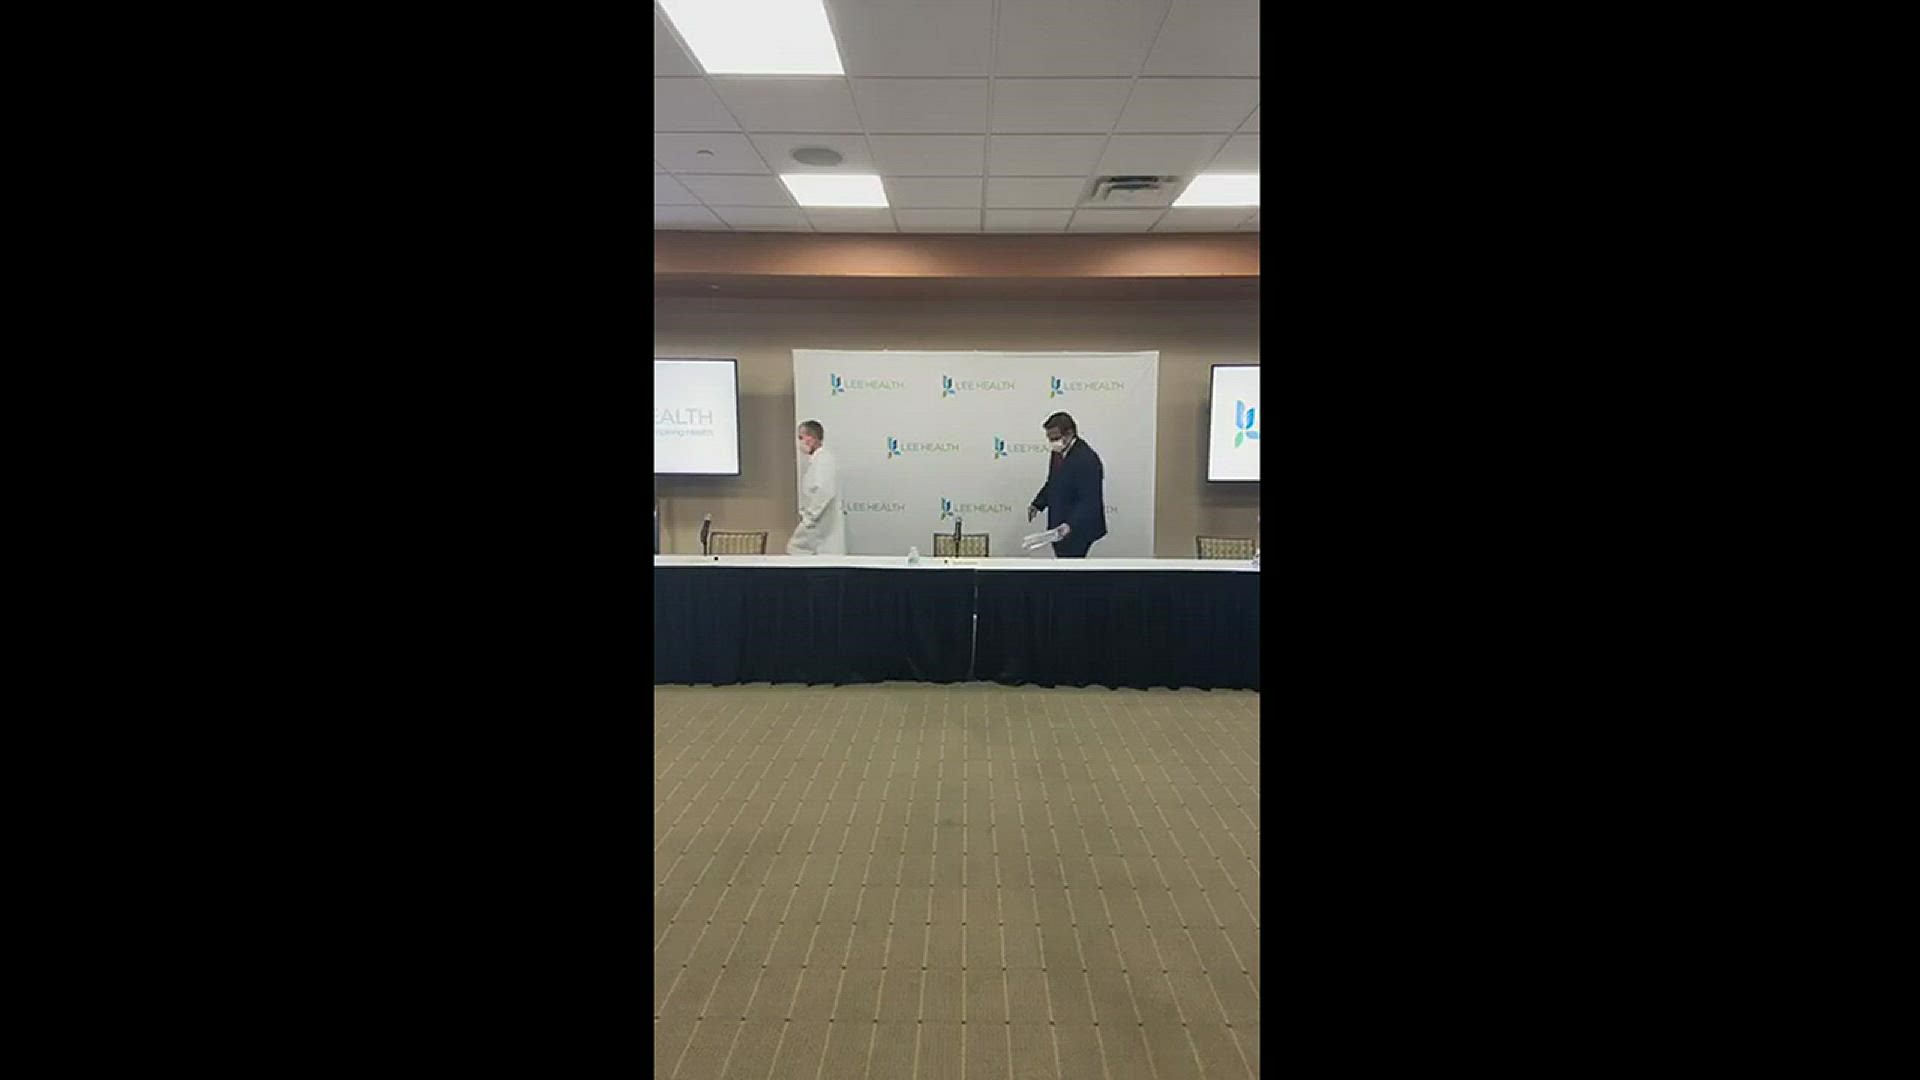 Ron DeSantis held a news conference at Lee Health in Fort Myers Monday, May 11. He talks about antigen tests, as well talks COVID-19 response efforts. Vi